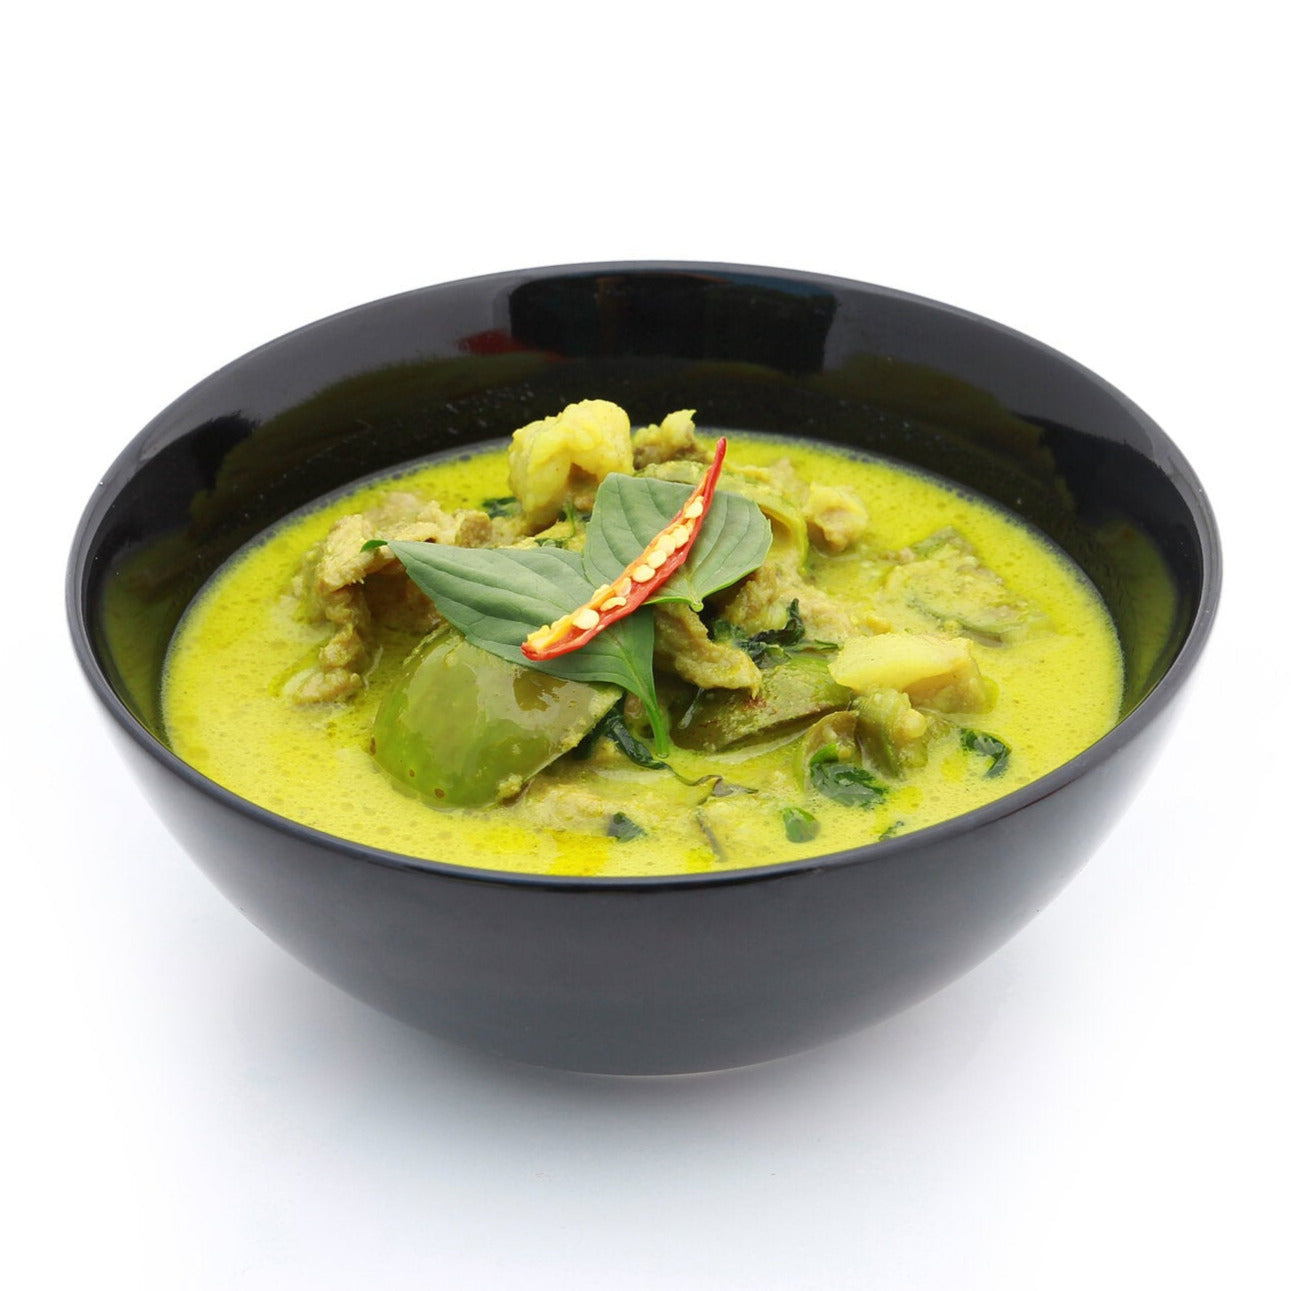 Bowl of Thai Green Curry Sauce with green peppers, basil leaves and a red chilli pepper.